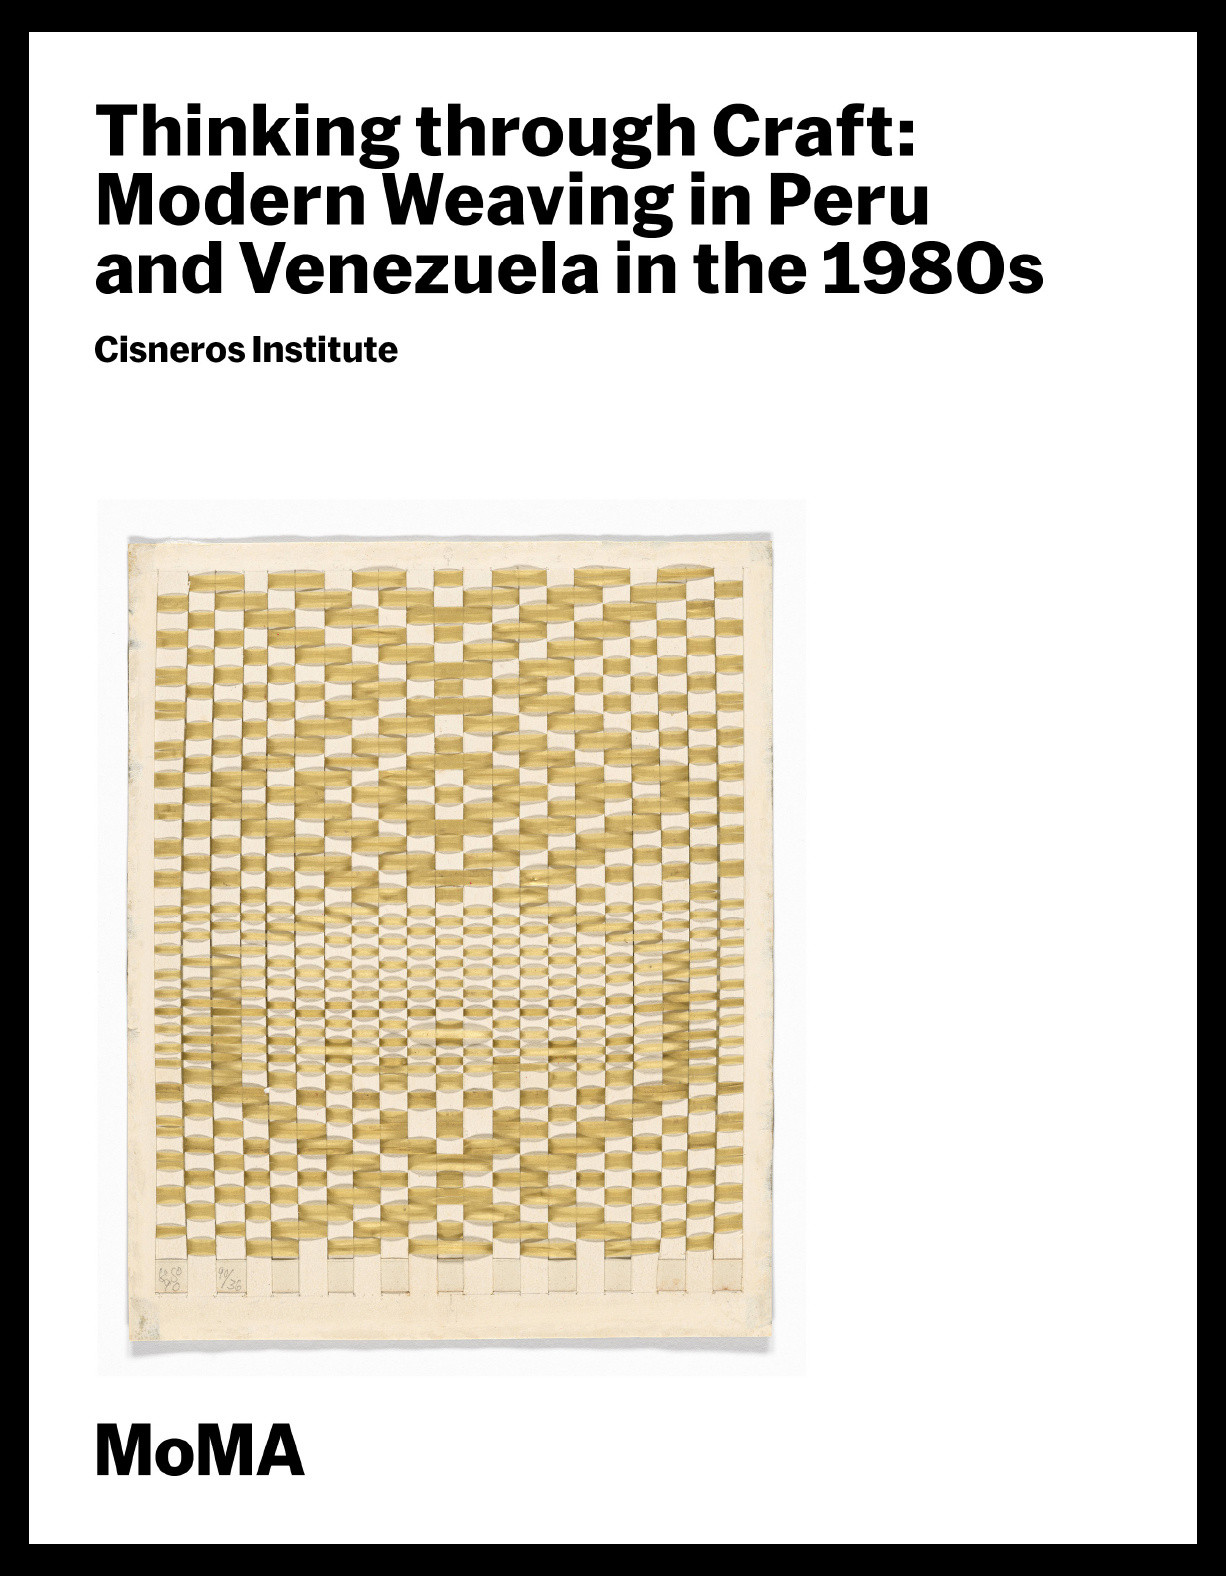 Cover of the essay ‟Thinking through Craft: Modern Weaving in Peru and Venezuela in the 1980s”